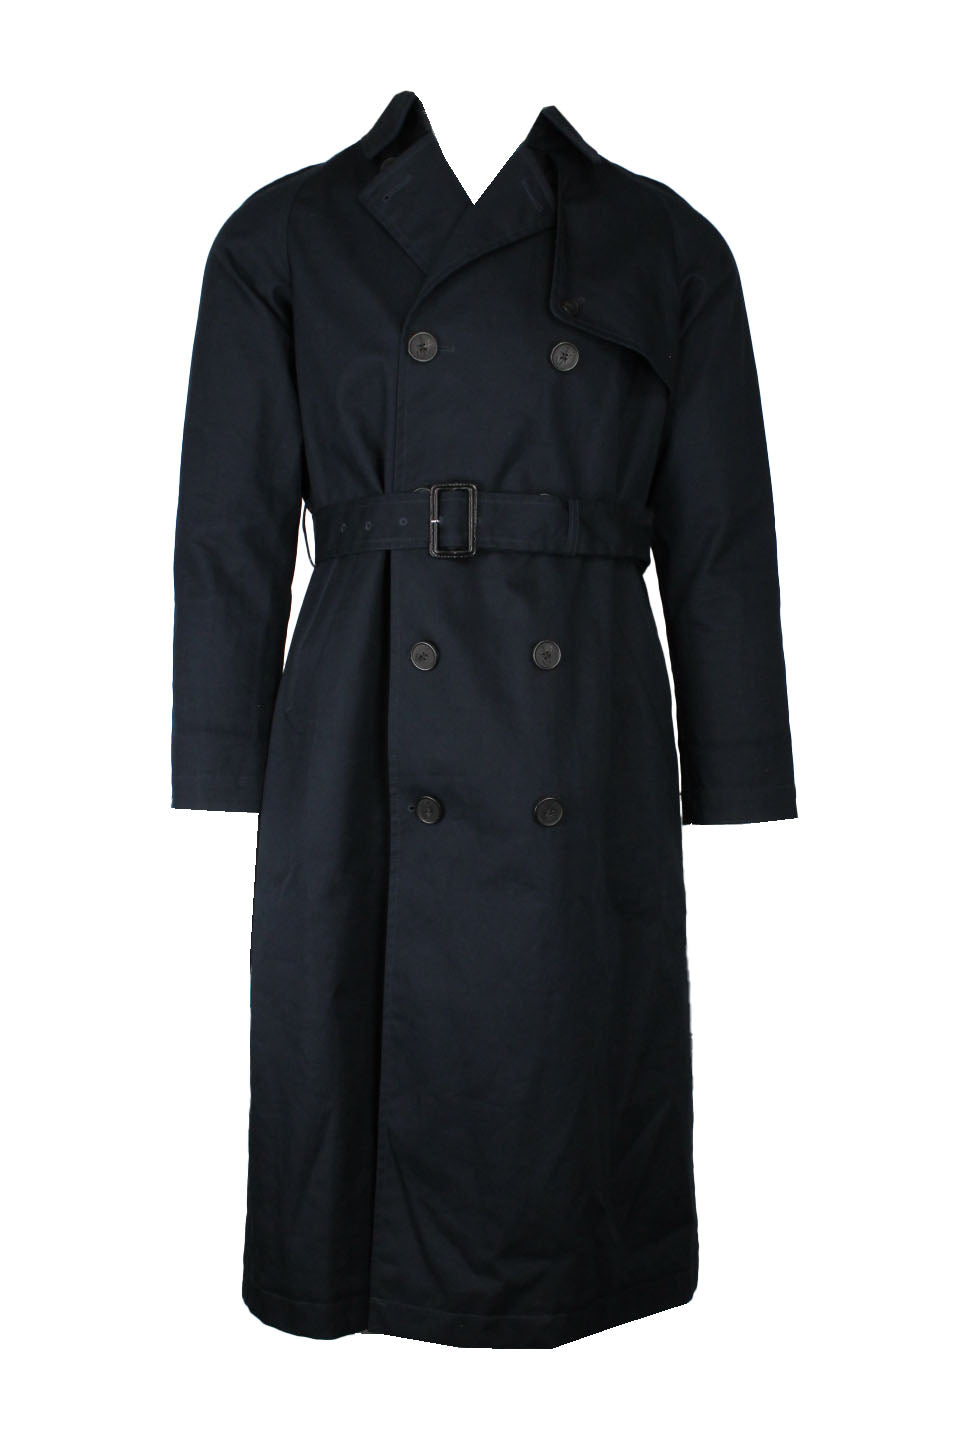 front view of jw anderson x uniqlo navy front button up trench coat. features side hand pockets, inner pockets, fully plaid lined, storm flap accent at left shoulder, black flap yoke, back vent tab, and buckled belt at waist. 